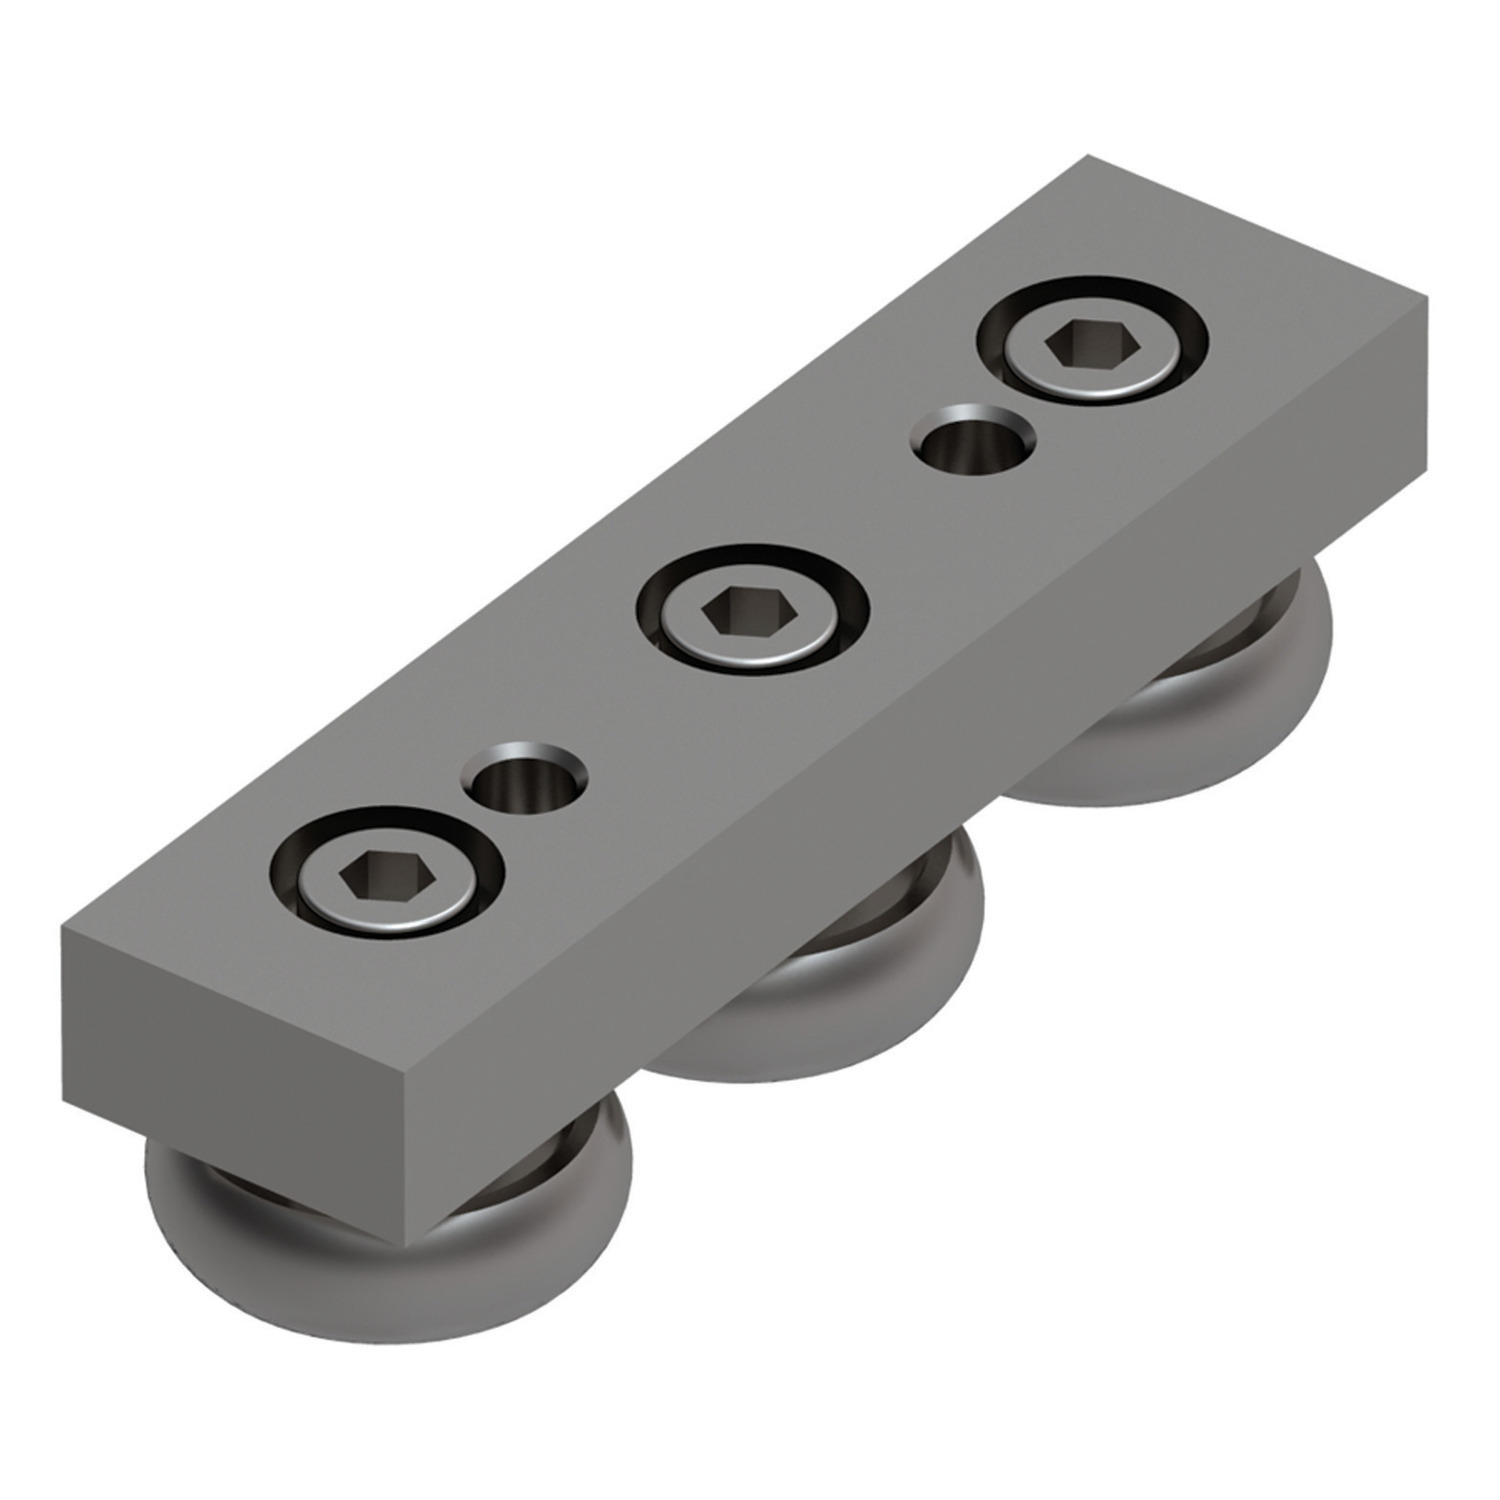 Low Cost Rails Solid bodied sliders made from zinc plated steel.